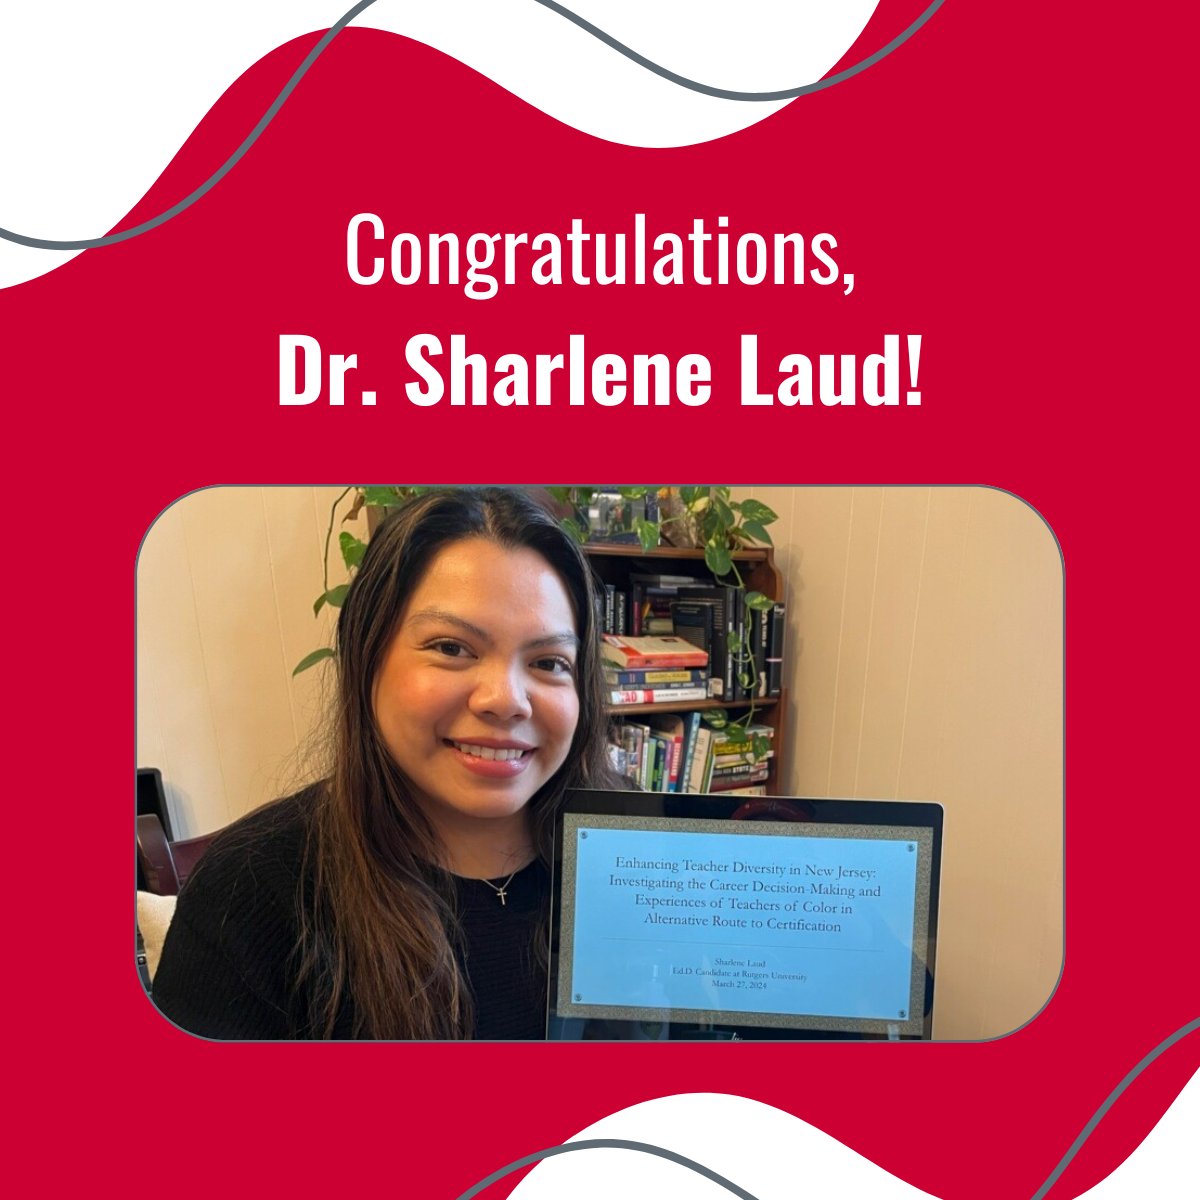 Join us in congratulating Assistant Director and proud Scarlet Knight Dr. Sharlene Laud for successfully defending her dissertation. As part of @RutgersGSE, Dr. Laud focused on teacher diversity and the experiences of Alternate Route teachers in New Jersey. #Education #Teaching